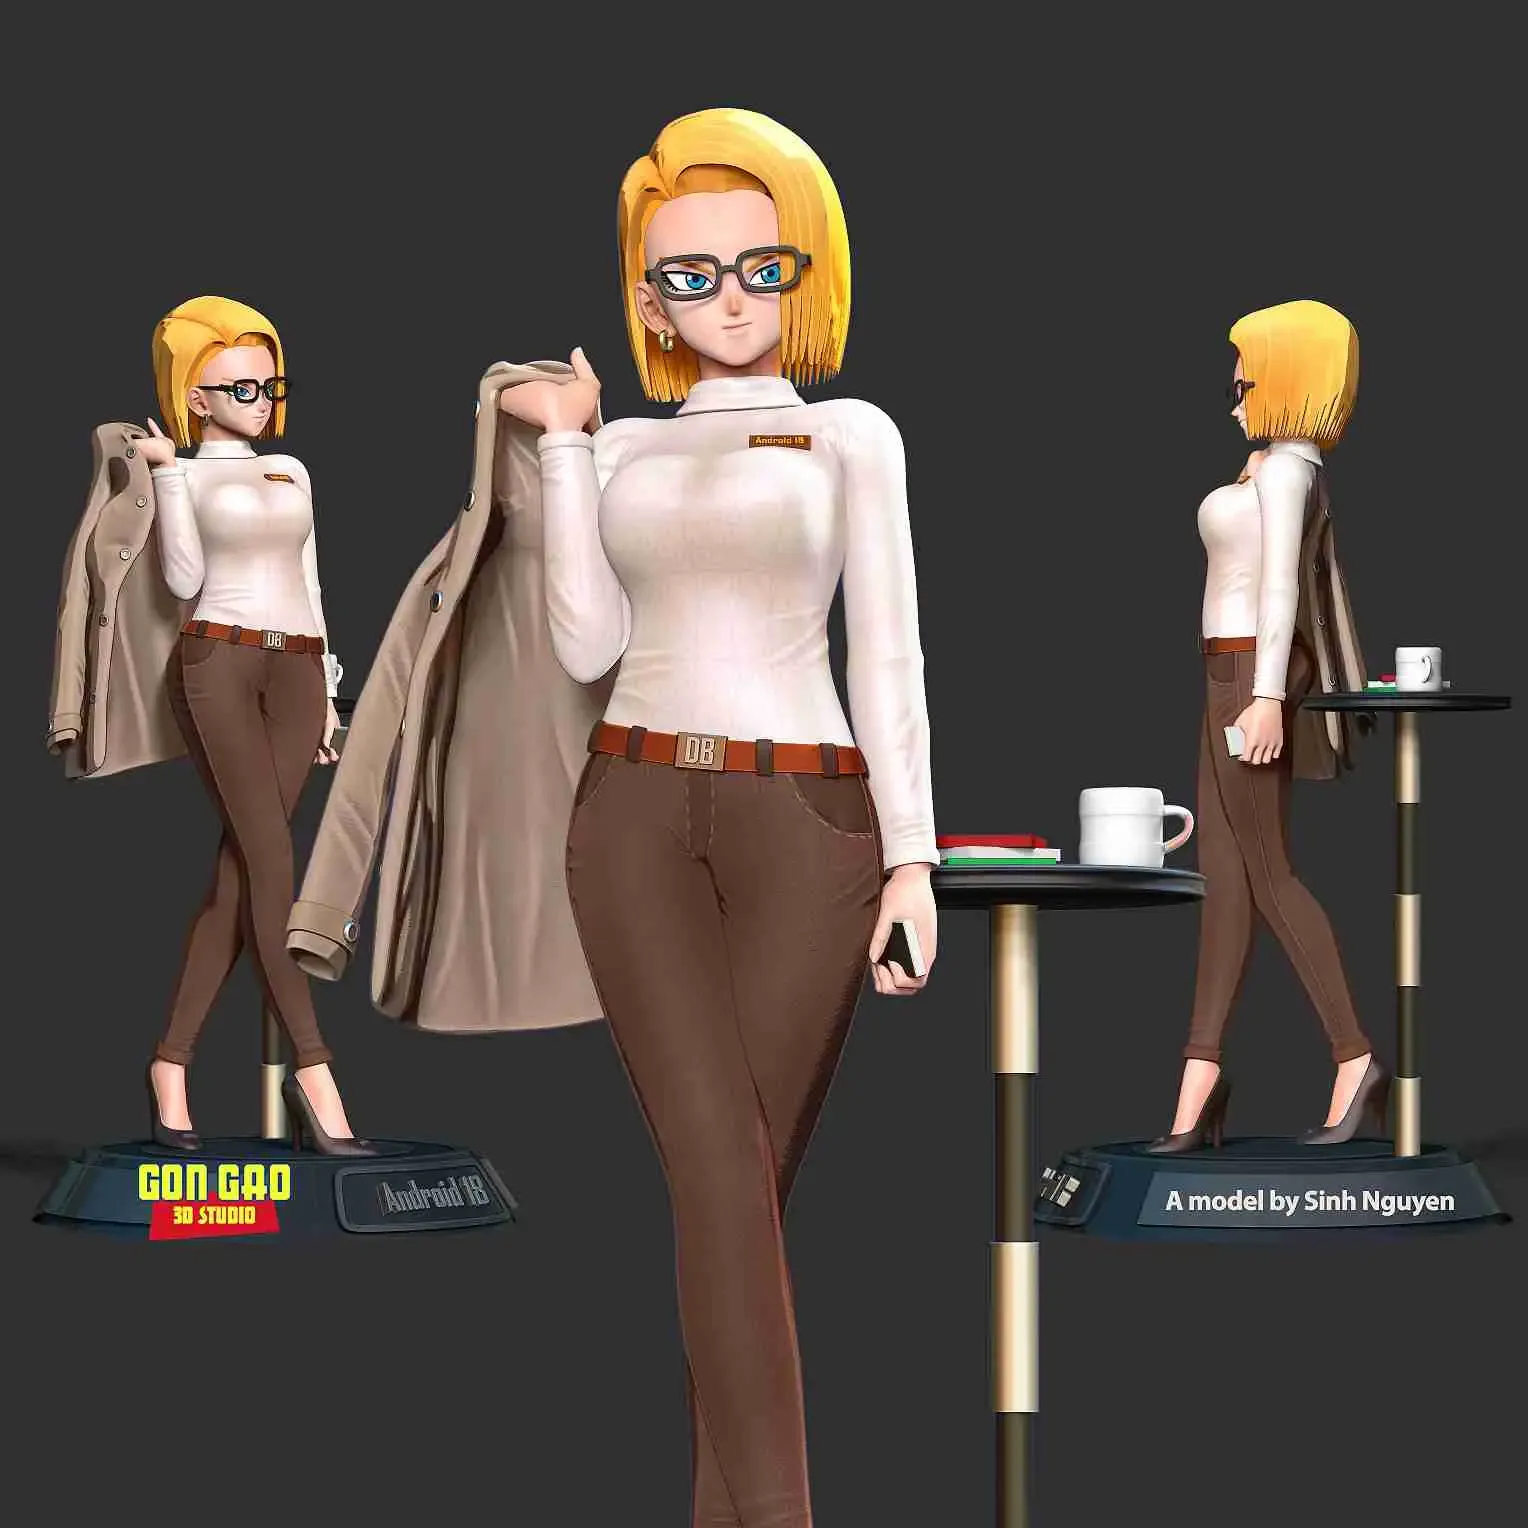 Android 18 - Office Girl